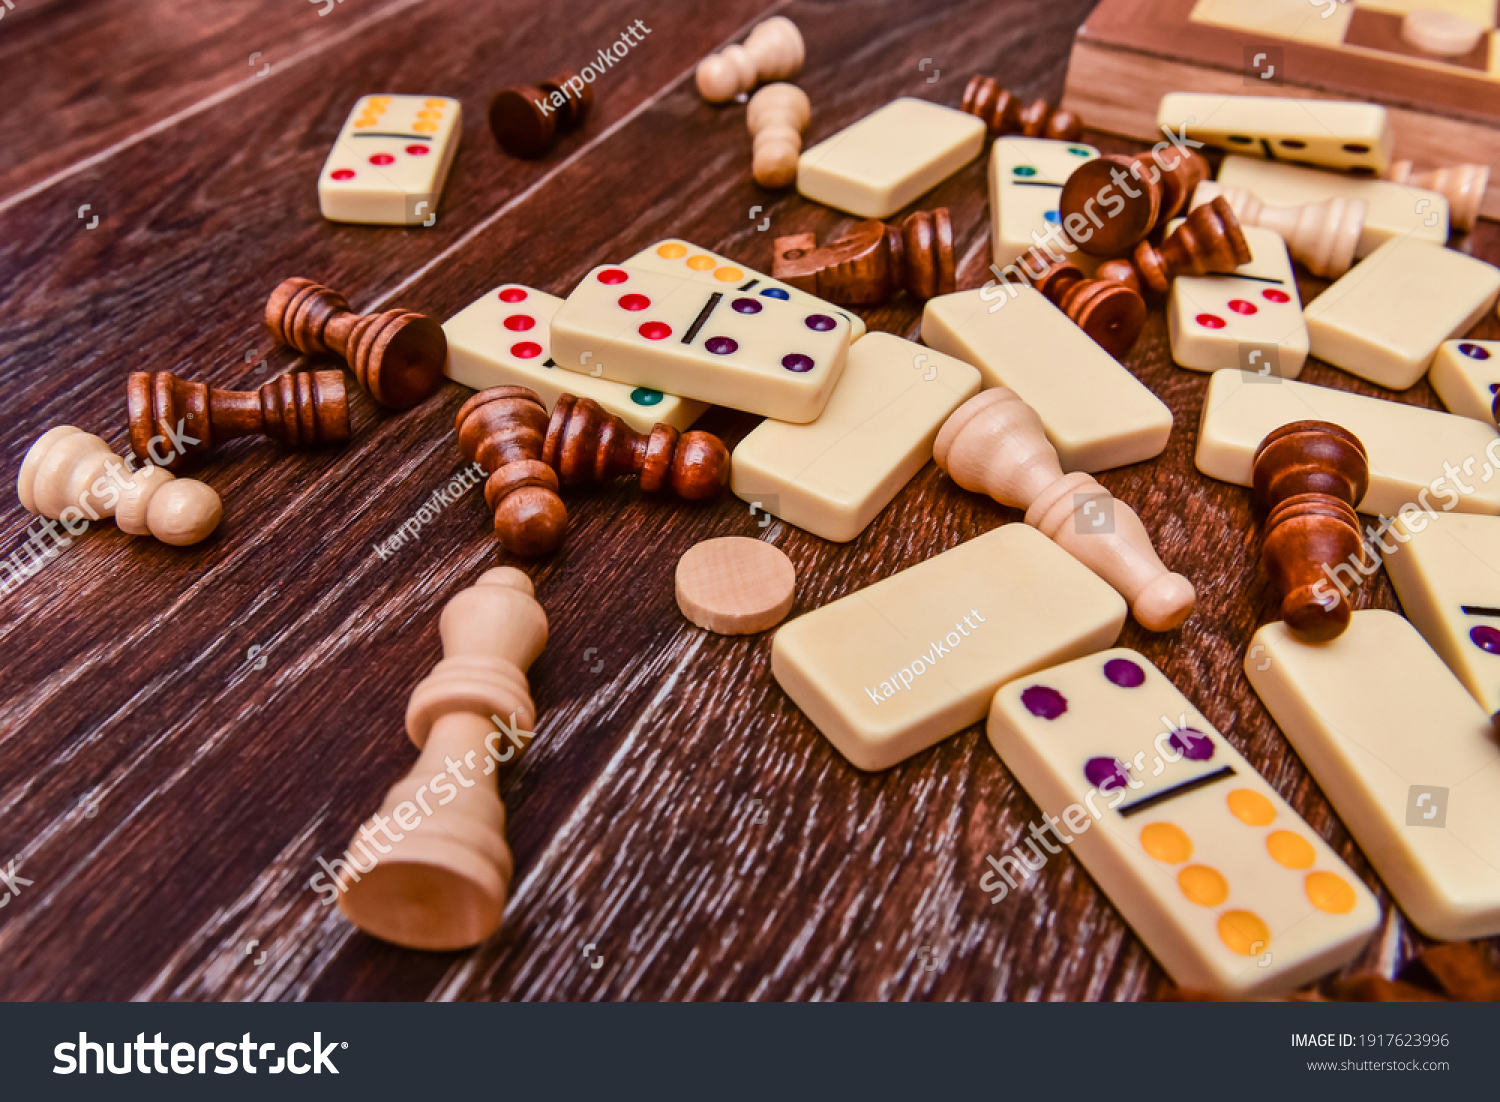 A variety of board game pieces. A background miscellaneous board game pieces. #1917623996